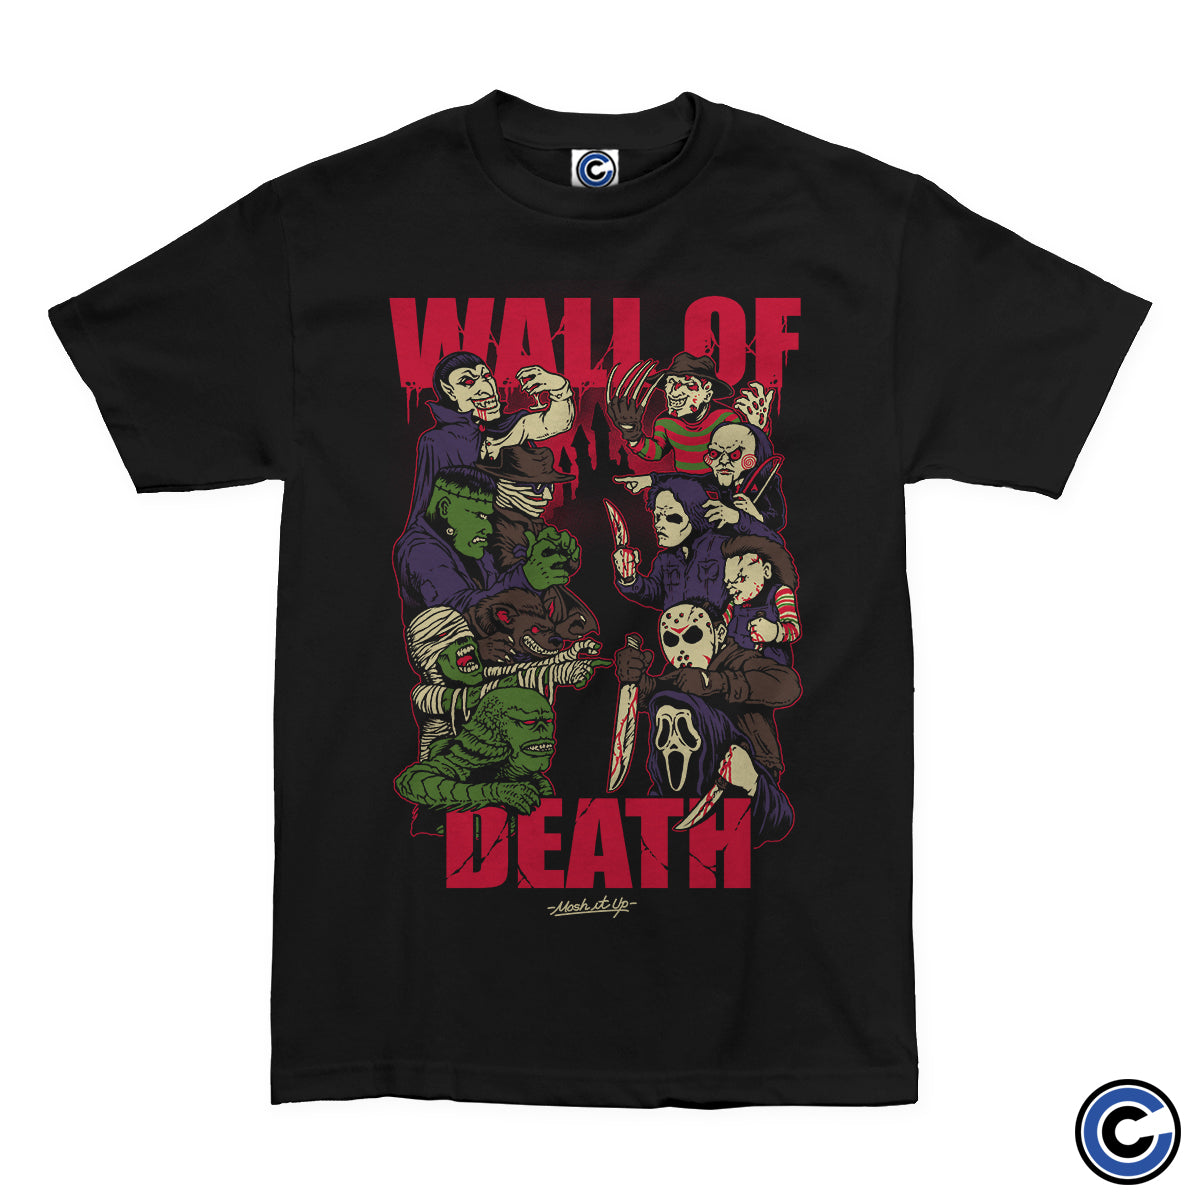 Mosh It Up "Wall of Death Monster" Shirt